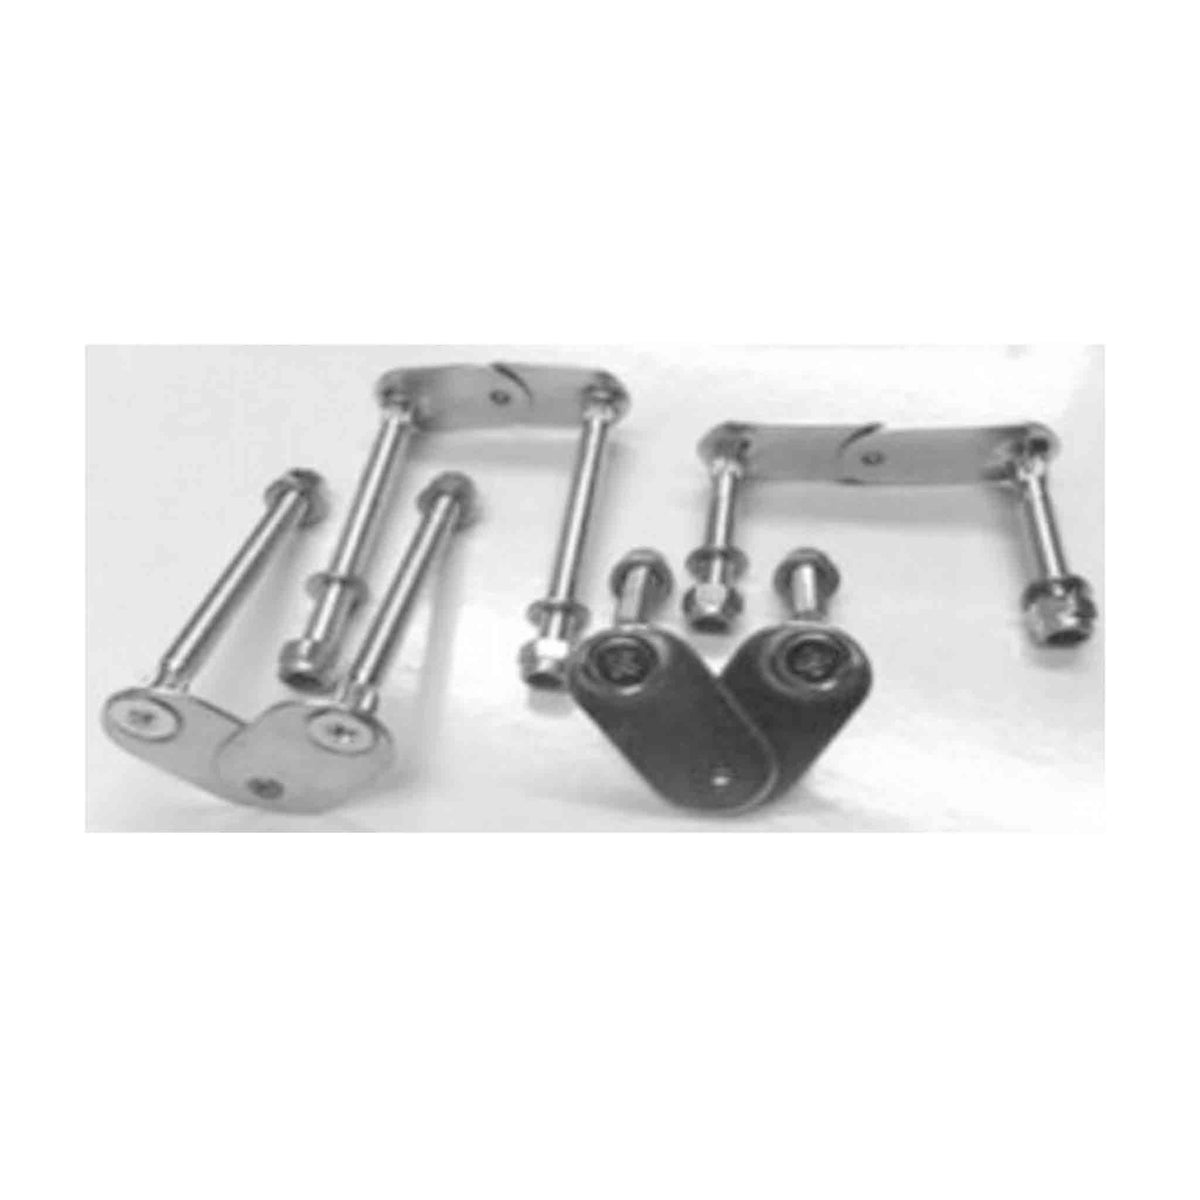 Roller Skates Plates Mounting Fixing Kits- 2 Front &amp; 2 Rear - Roller Skates Parts and Accessories | JT Skate